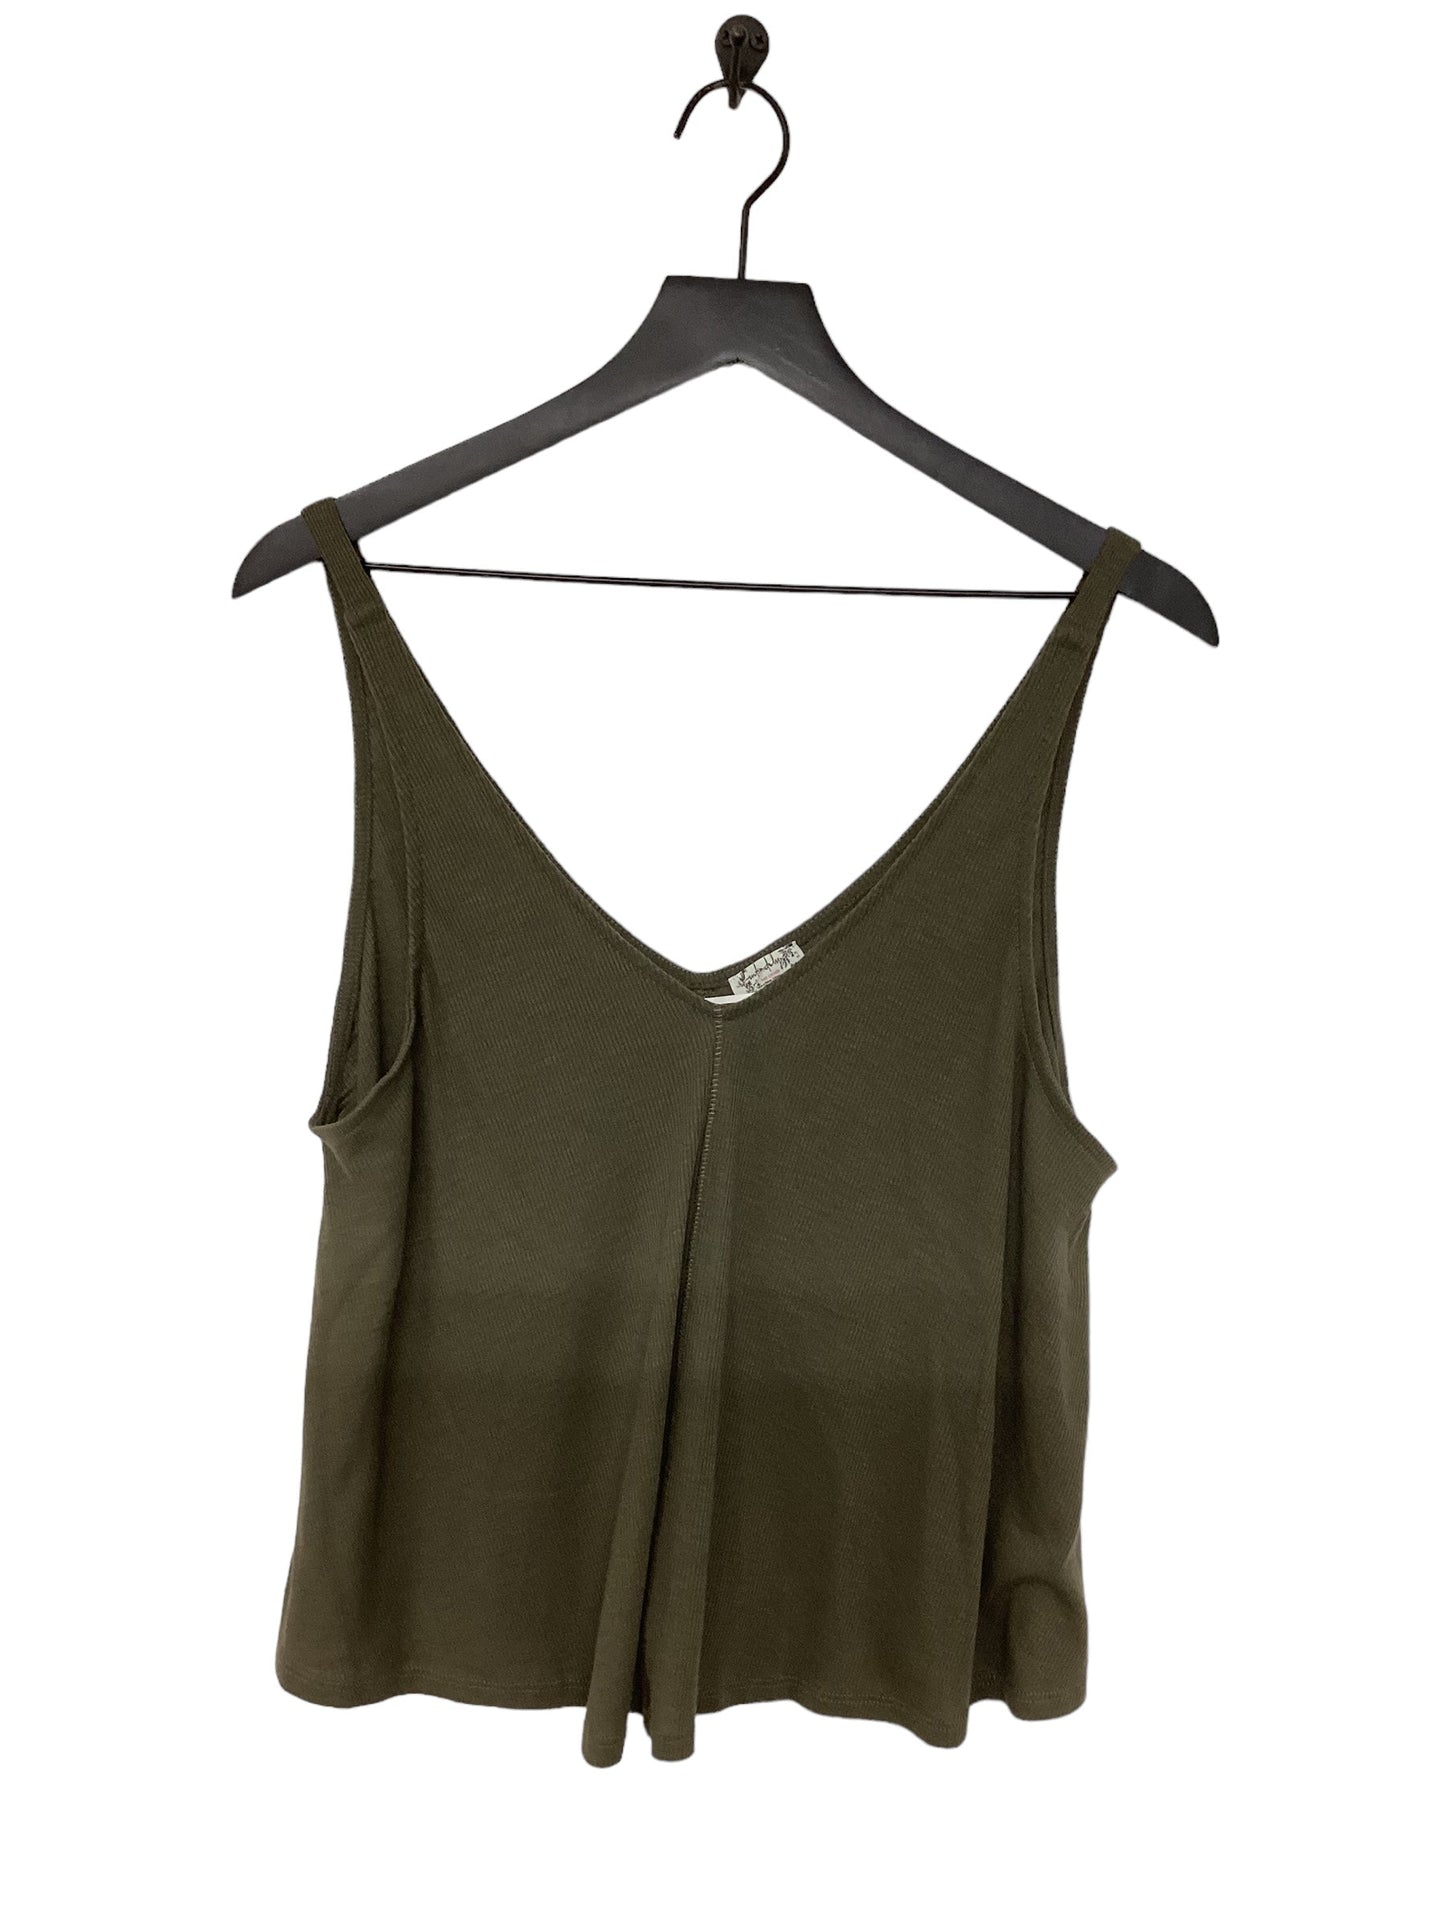 Green Top Sleeveless Free People, Size S